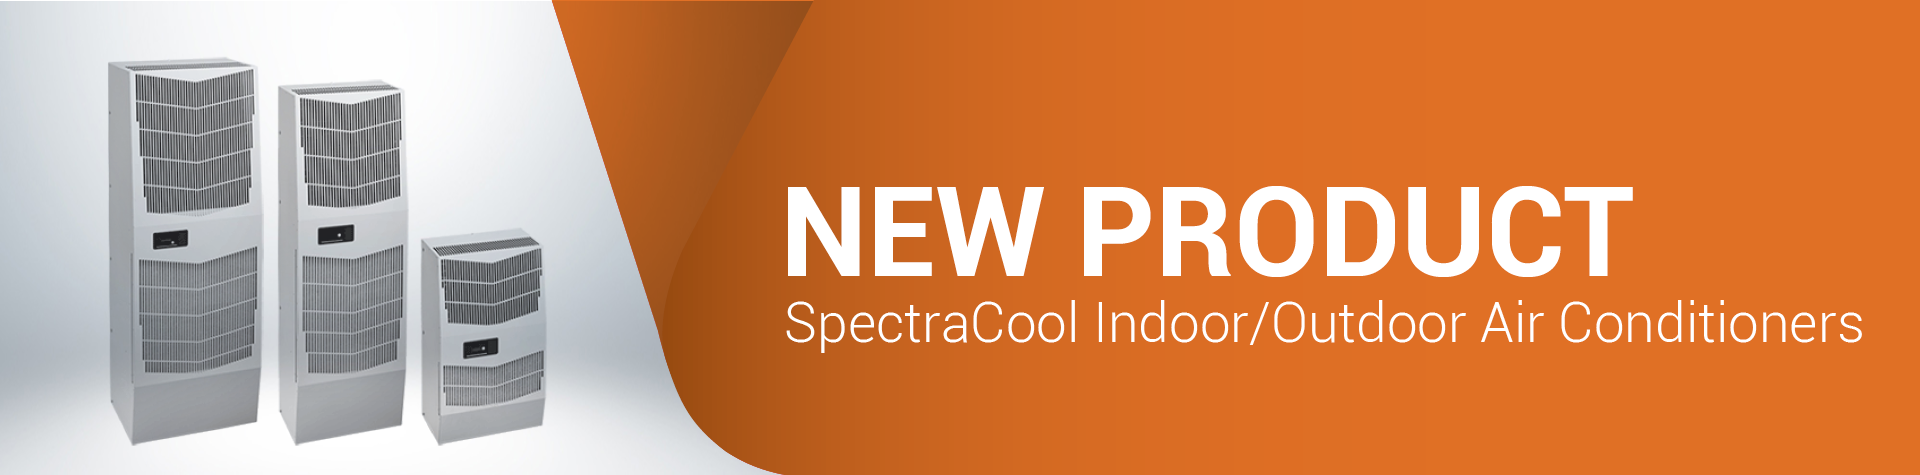 New Product- SpectraCool Conditioners